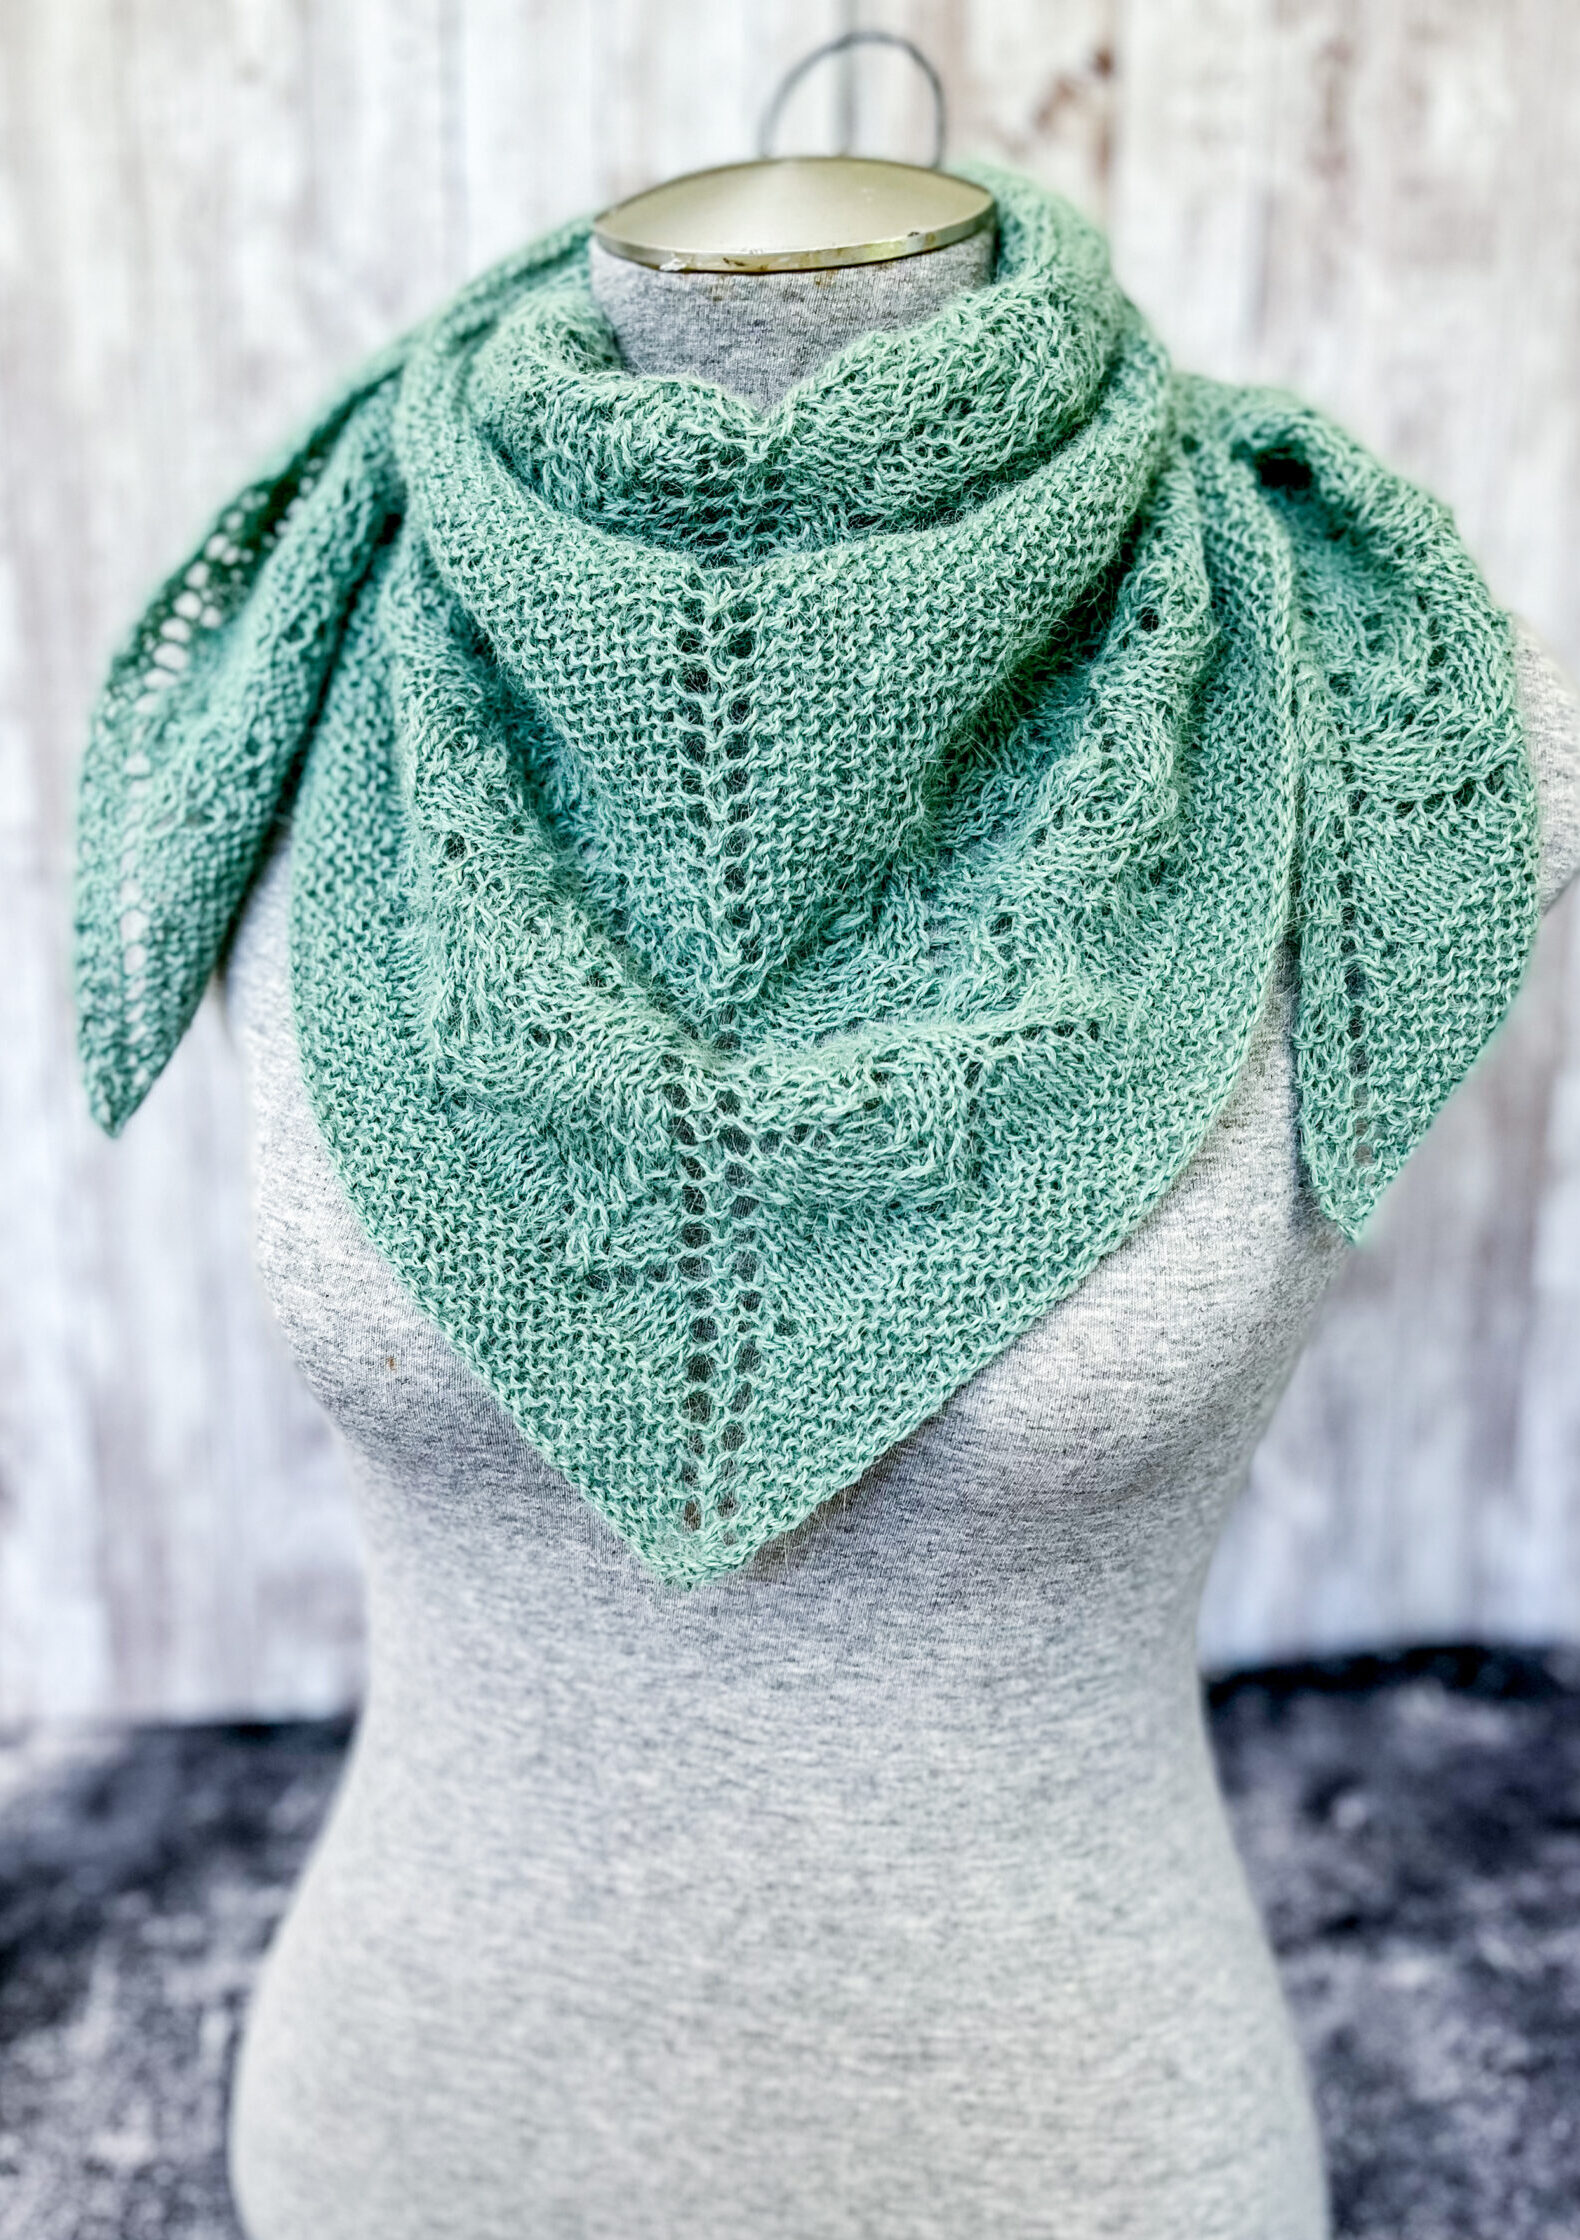 A light eucalyptus green shawl with lace sections alternating with solid sections is shown wrapped and gathered around the neck of a mannequin torso and pinned with a silver shawl pin